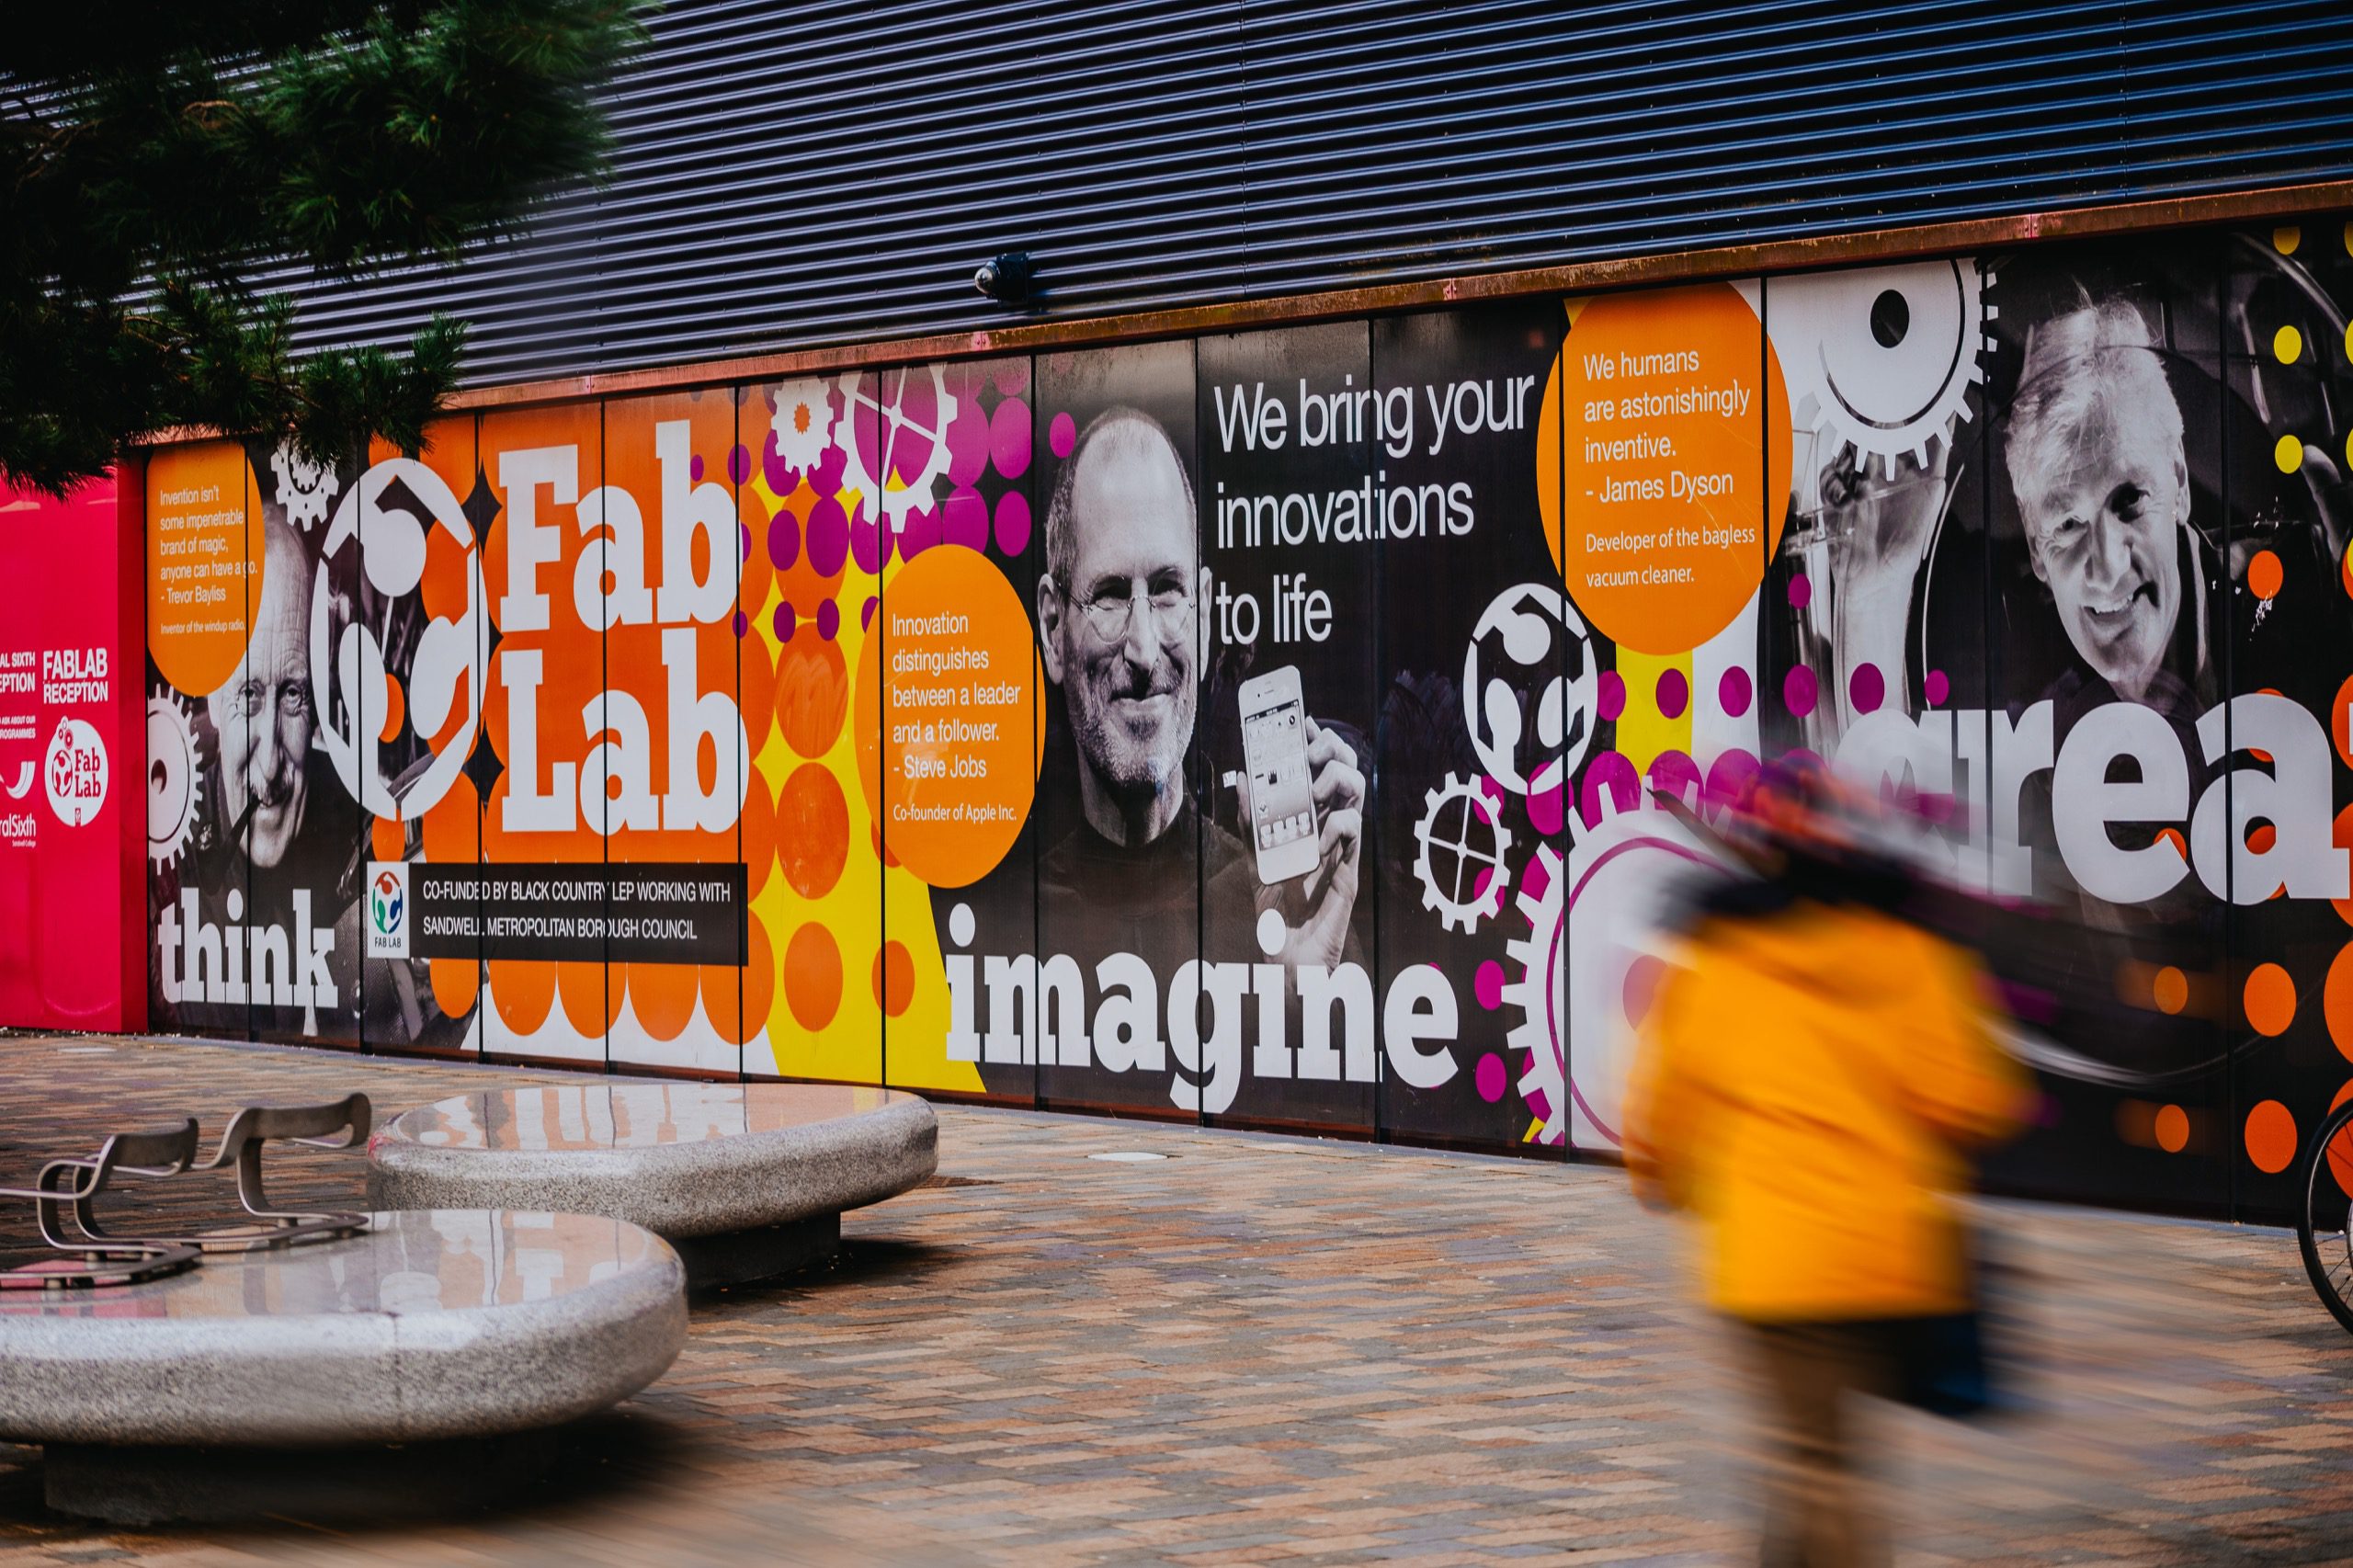 Hoarding designs for Fab Lab, 'We bring your innovations to life'.